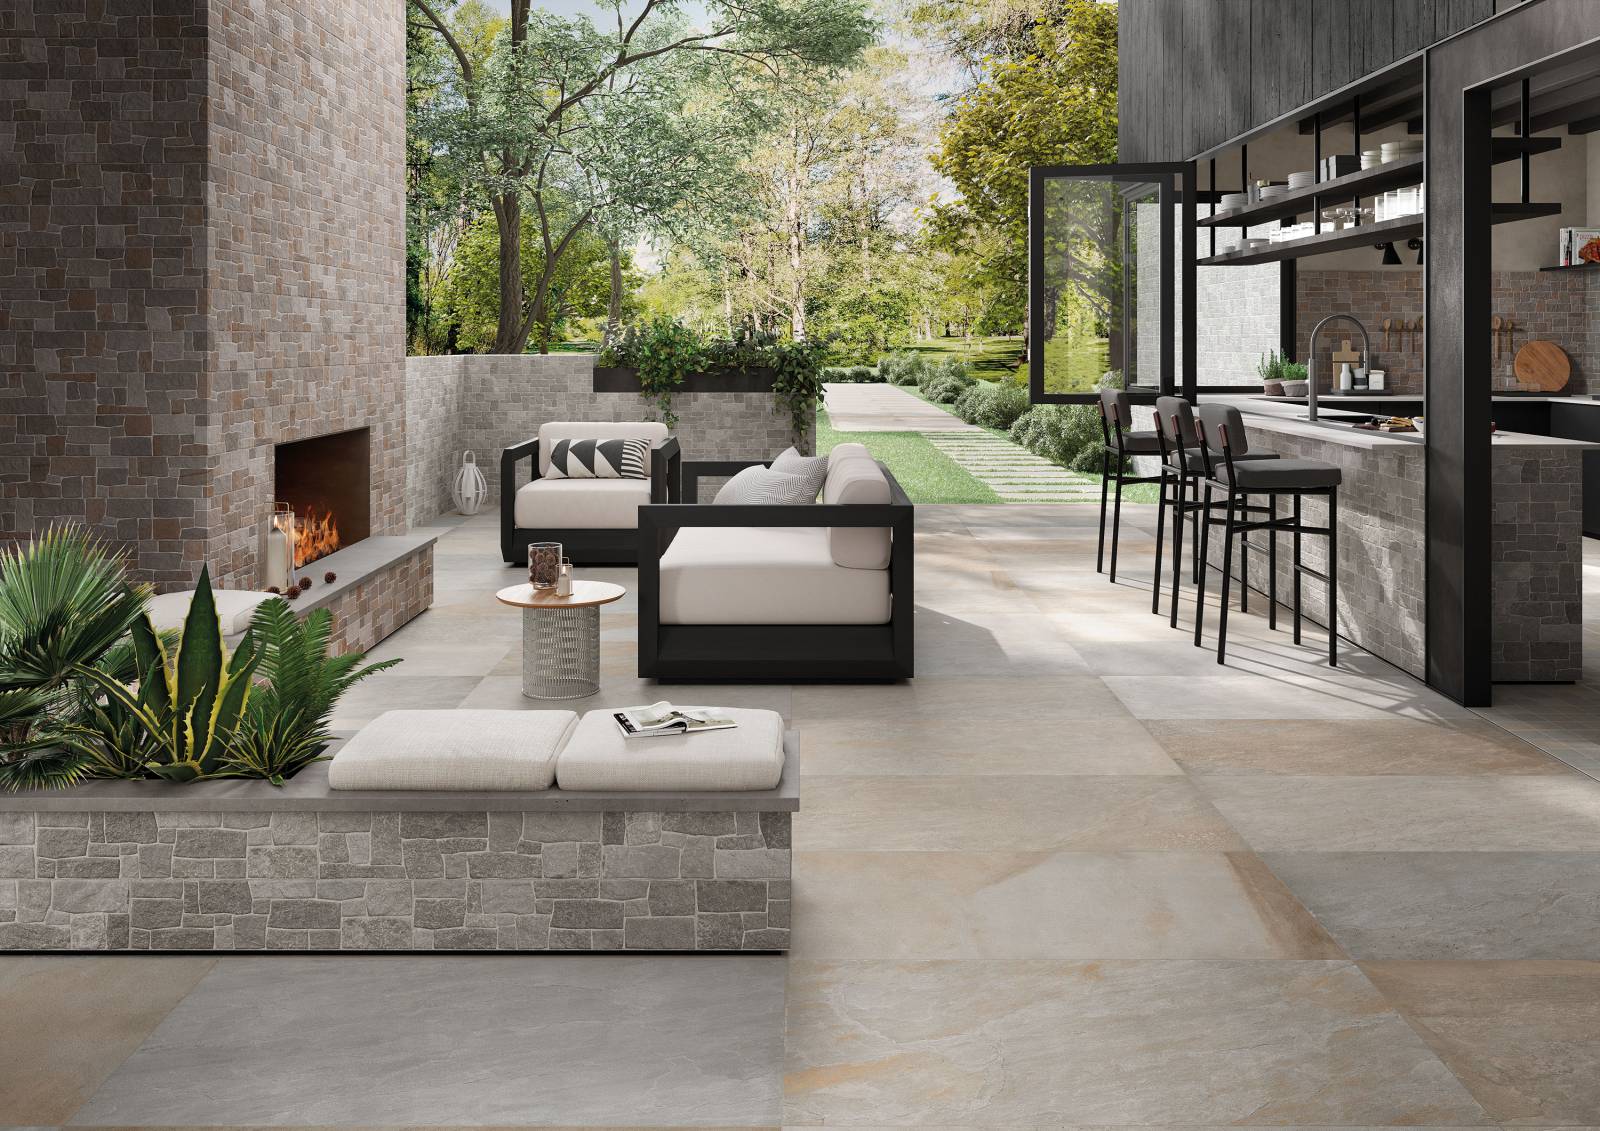 Hamilton Parker Cincinnati Specializes In Tile And Flooring Options For Your Home